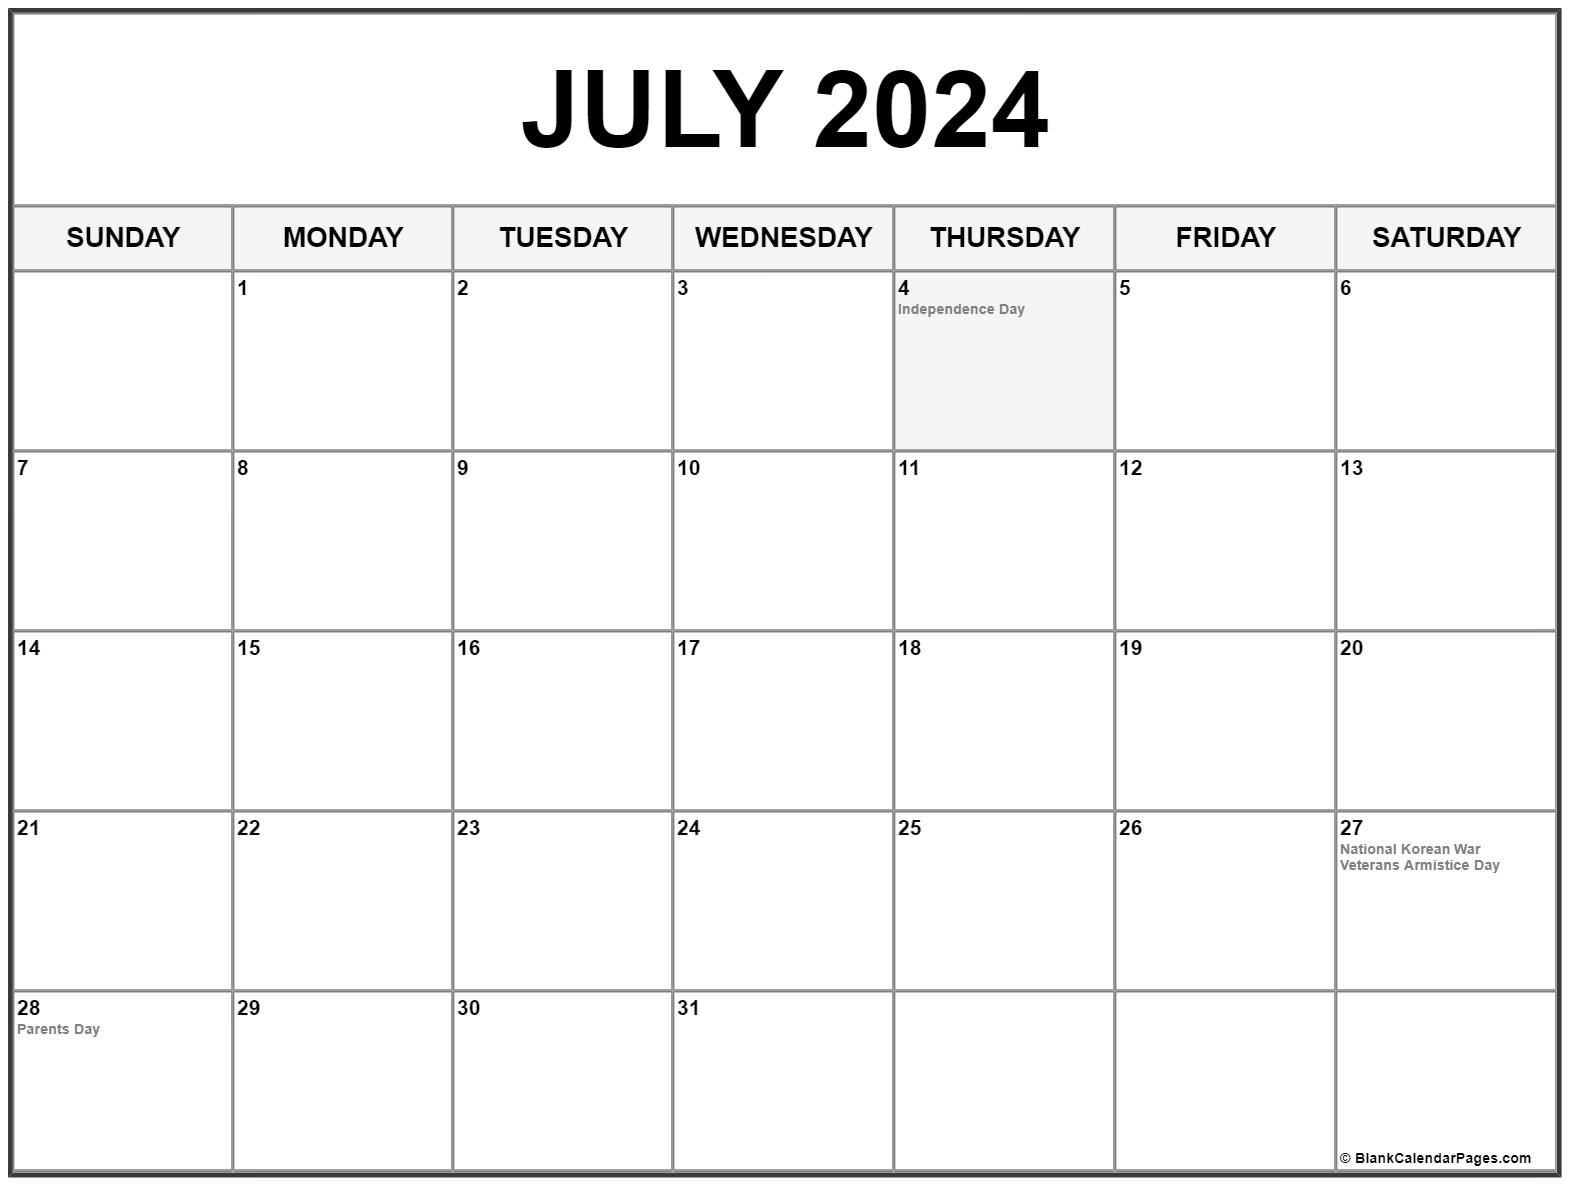 July 2024 With Holidays Calendar within July Calendar 2024 With Holidays